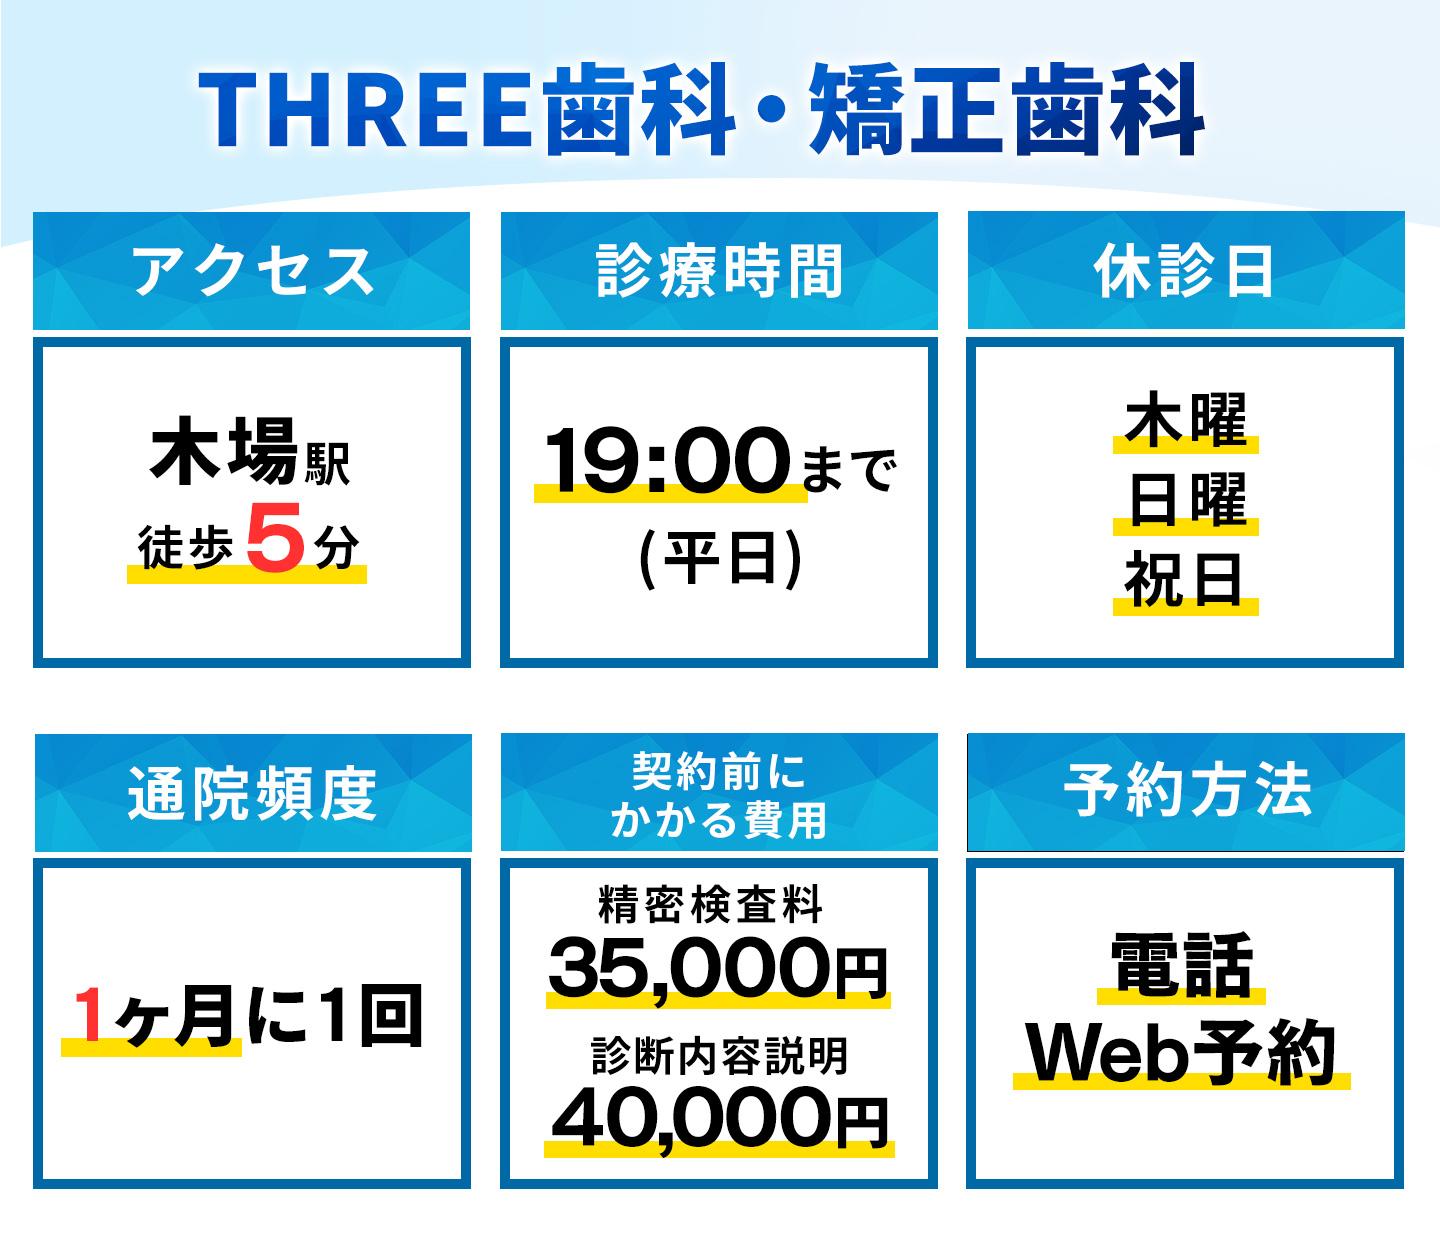 THREE歯科・矯正歯科の基本情報